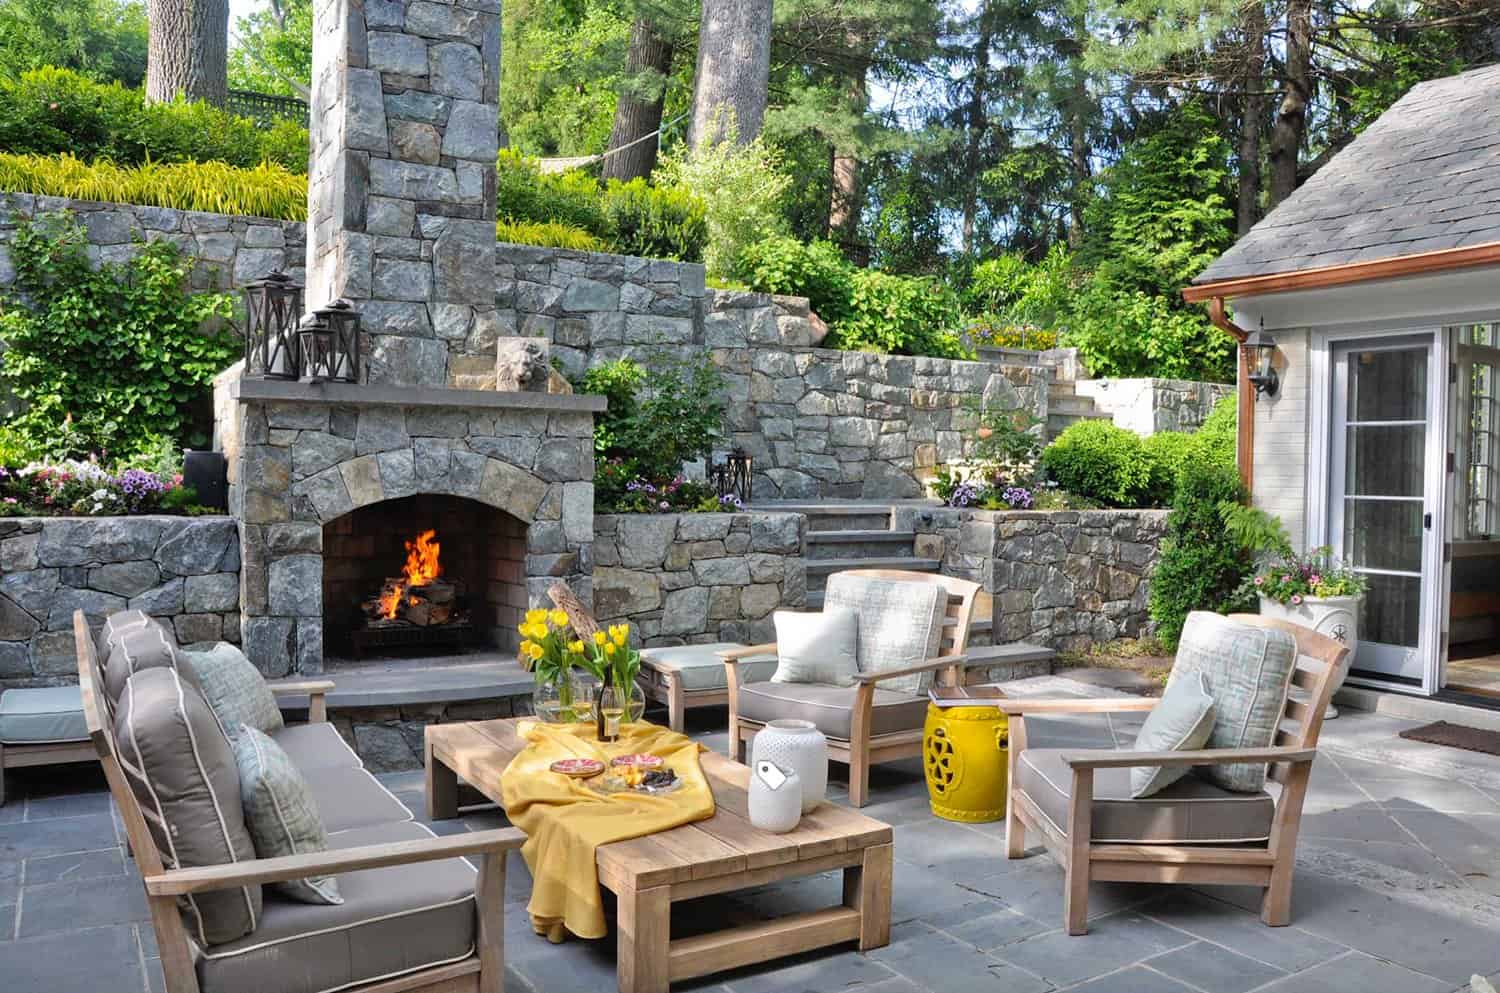 21 Outdoor Fireplace Ideas For A Cozy And Inviting Backyard